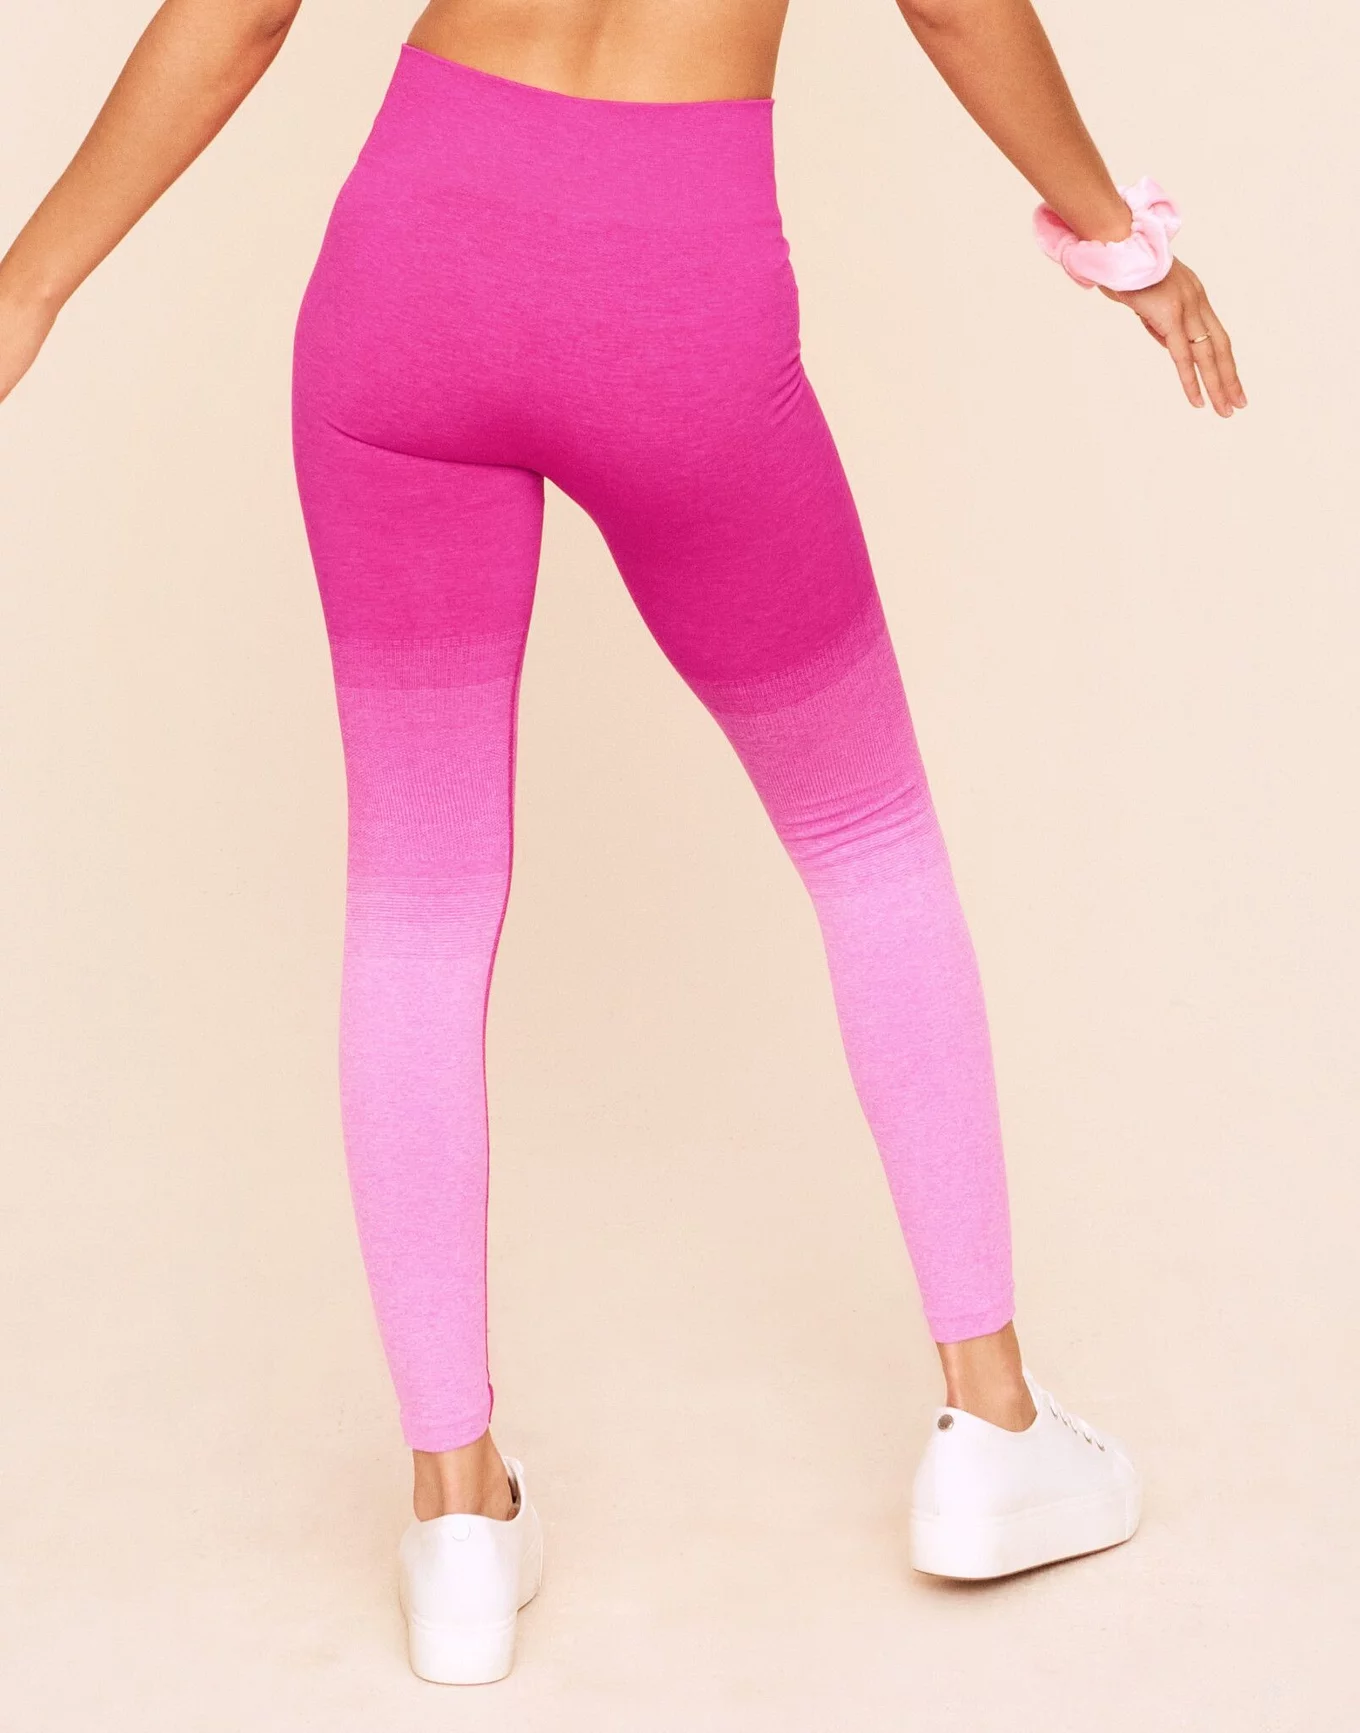 River Island Girls Pink Hype Ombre Leggings, £20.00